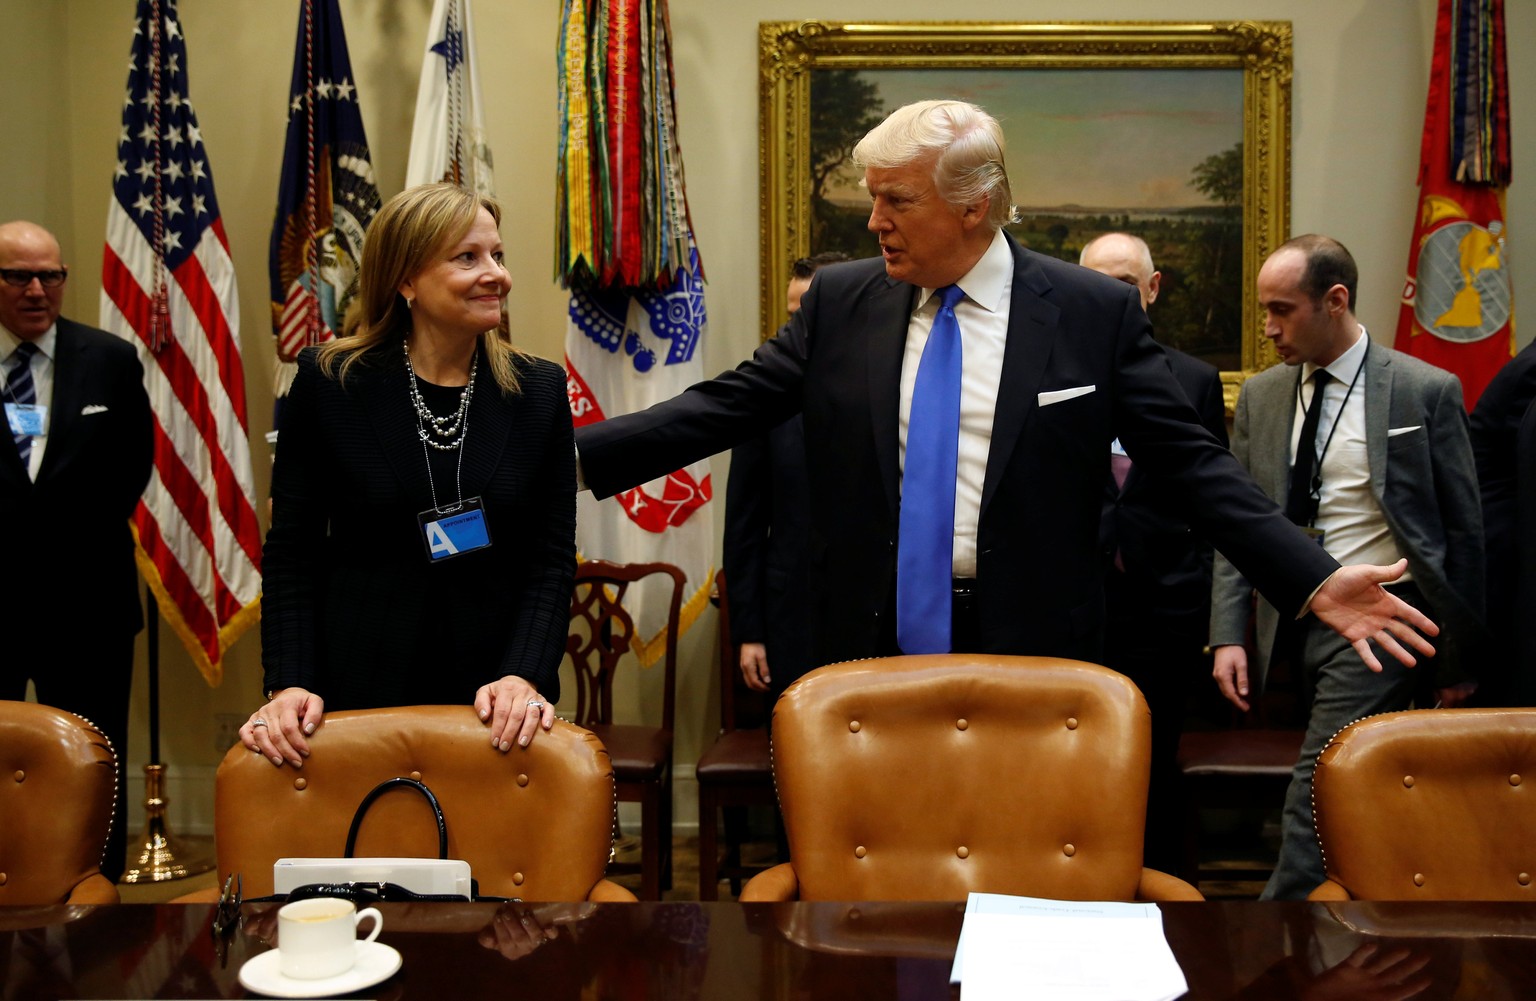 U.S. President Donald Trump talks with General Motors CEO Mary Barra as he hosts a meeting with U.S. auto industry CEOs at the White House in Washington January 24, 2017. REUTERS/Kevin Lamarque